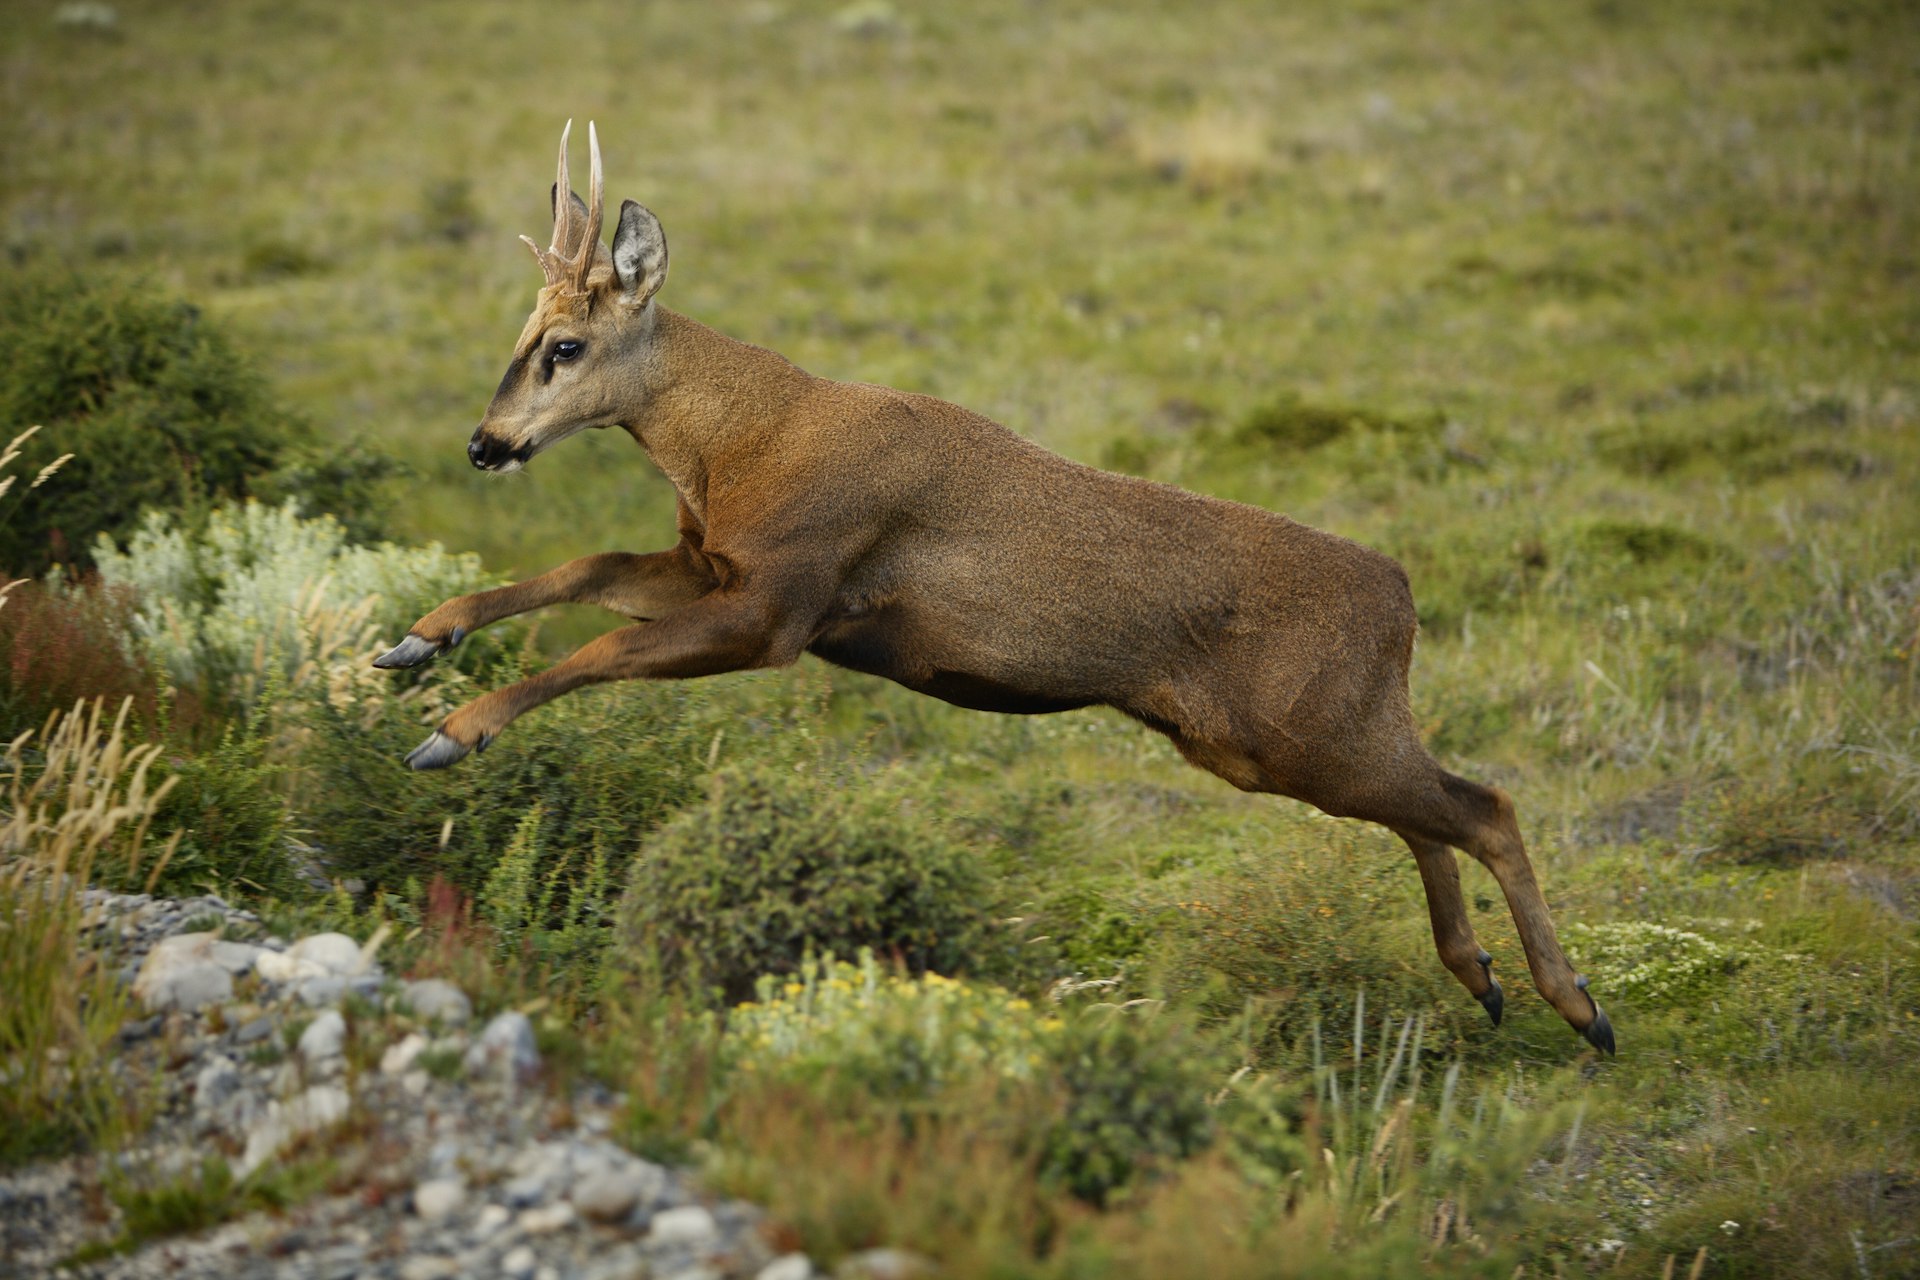 A deer-like creature leaps over some undergrowth